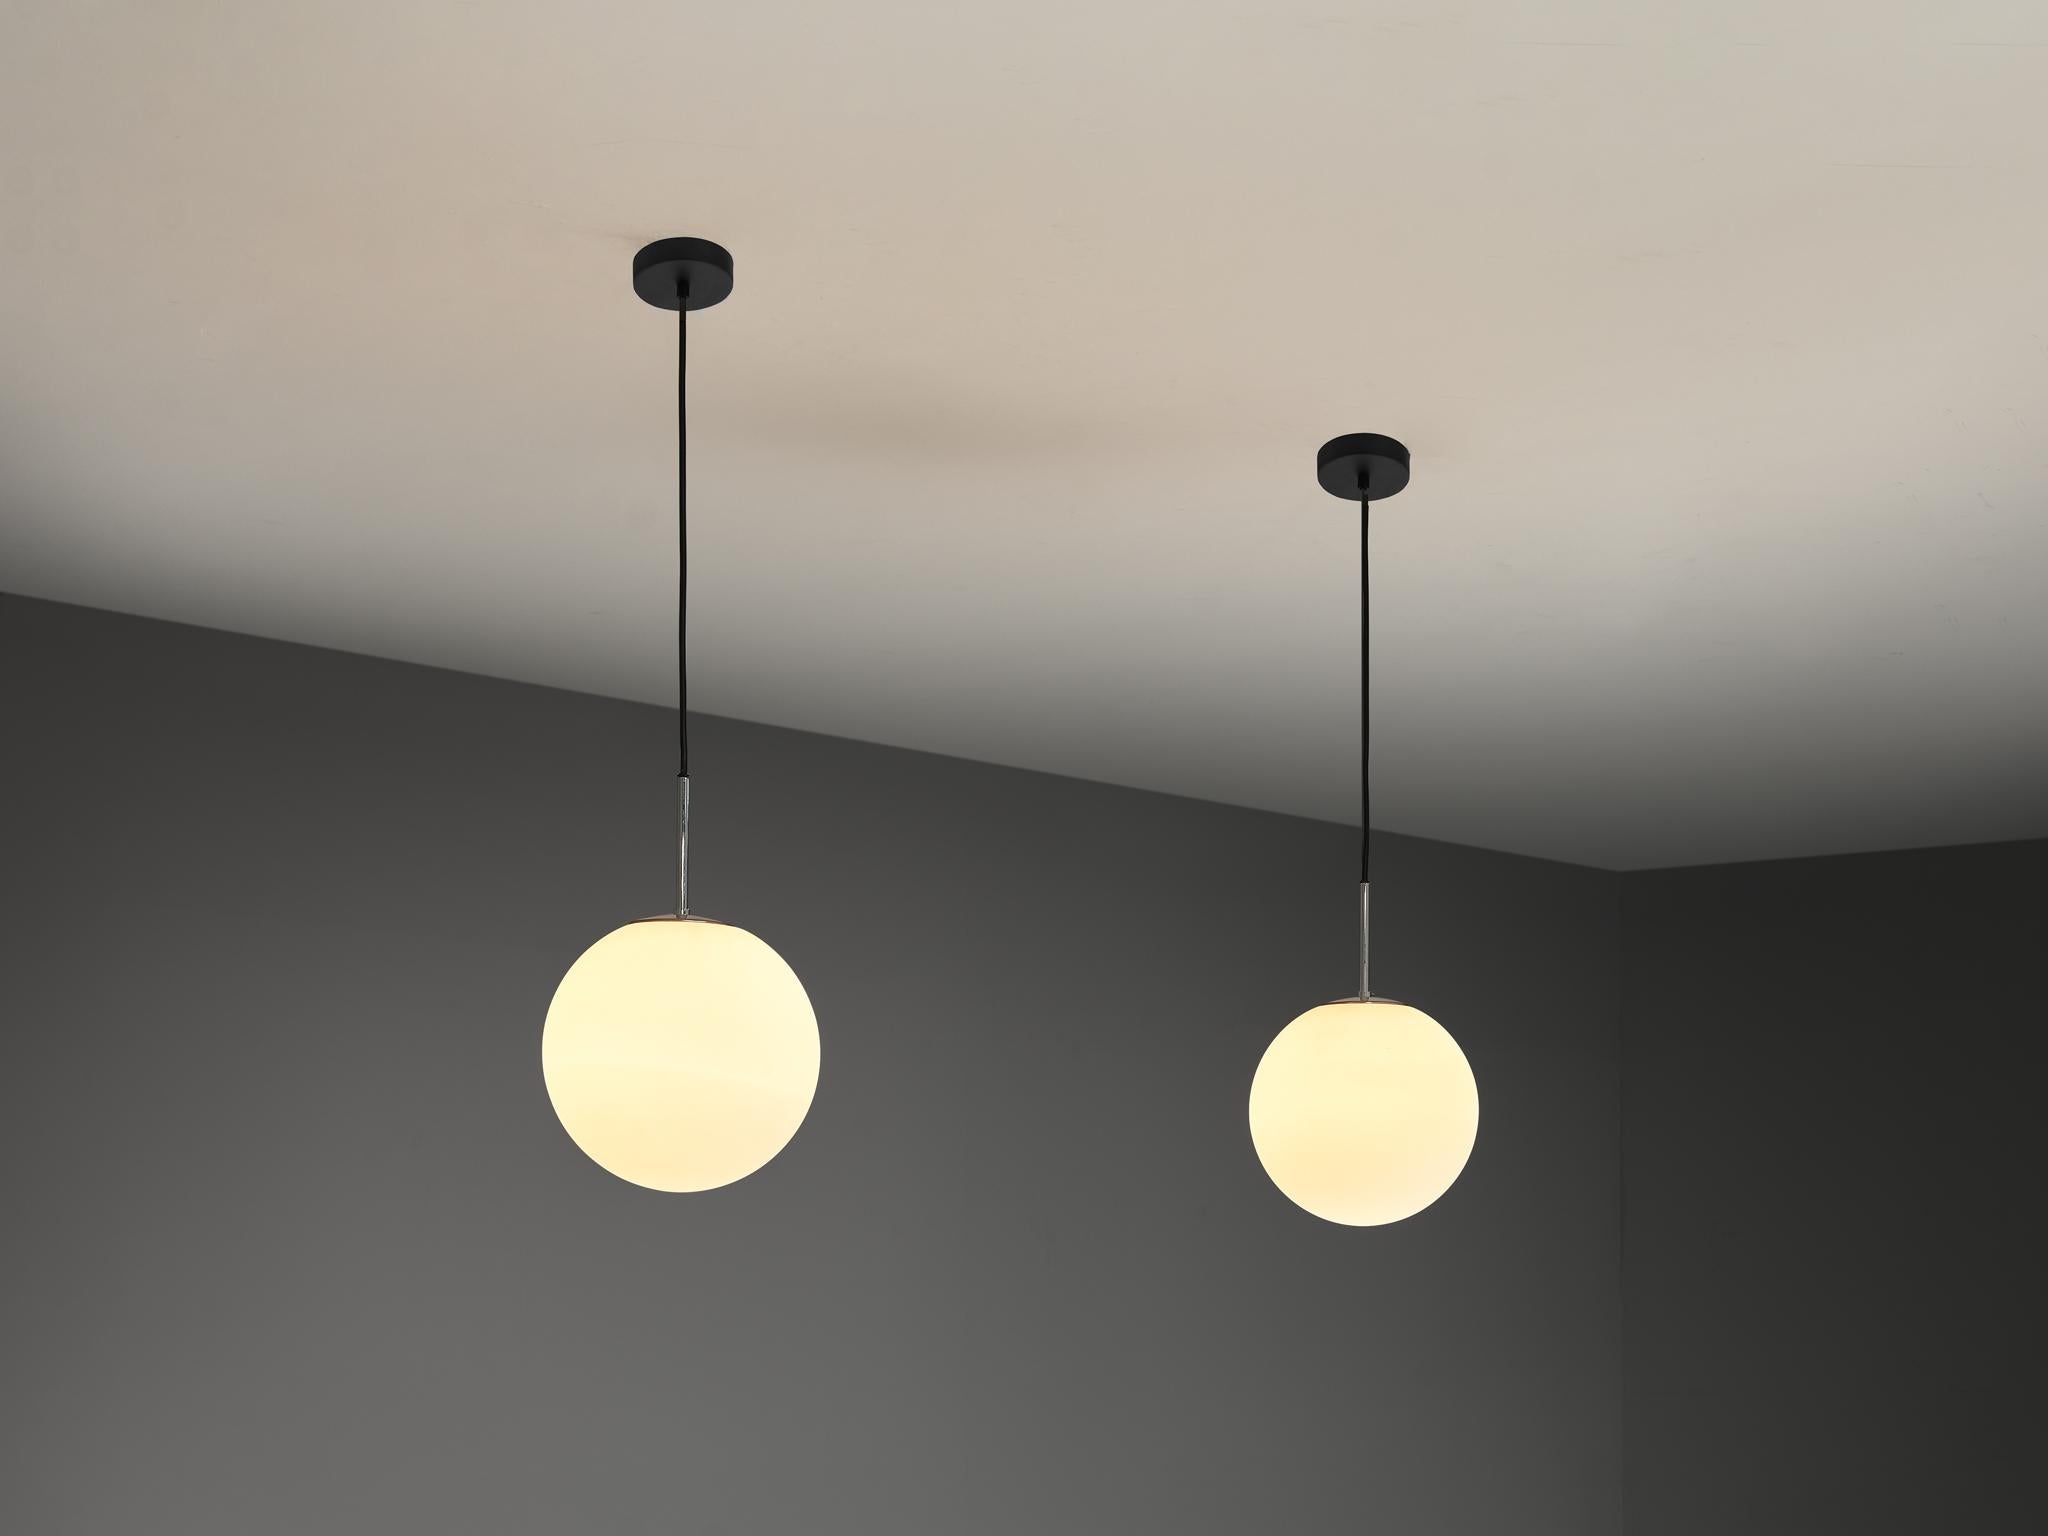 Pendants, glass, metal, Europe 1970s. 

Pair of modern pendants with white glass globe shaped spheres. Overall, an elegant but simplistic design. Due to the opaque texture and the light point, these pendants will create a nice and warm diffuse